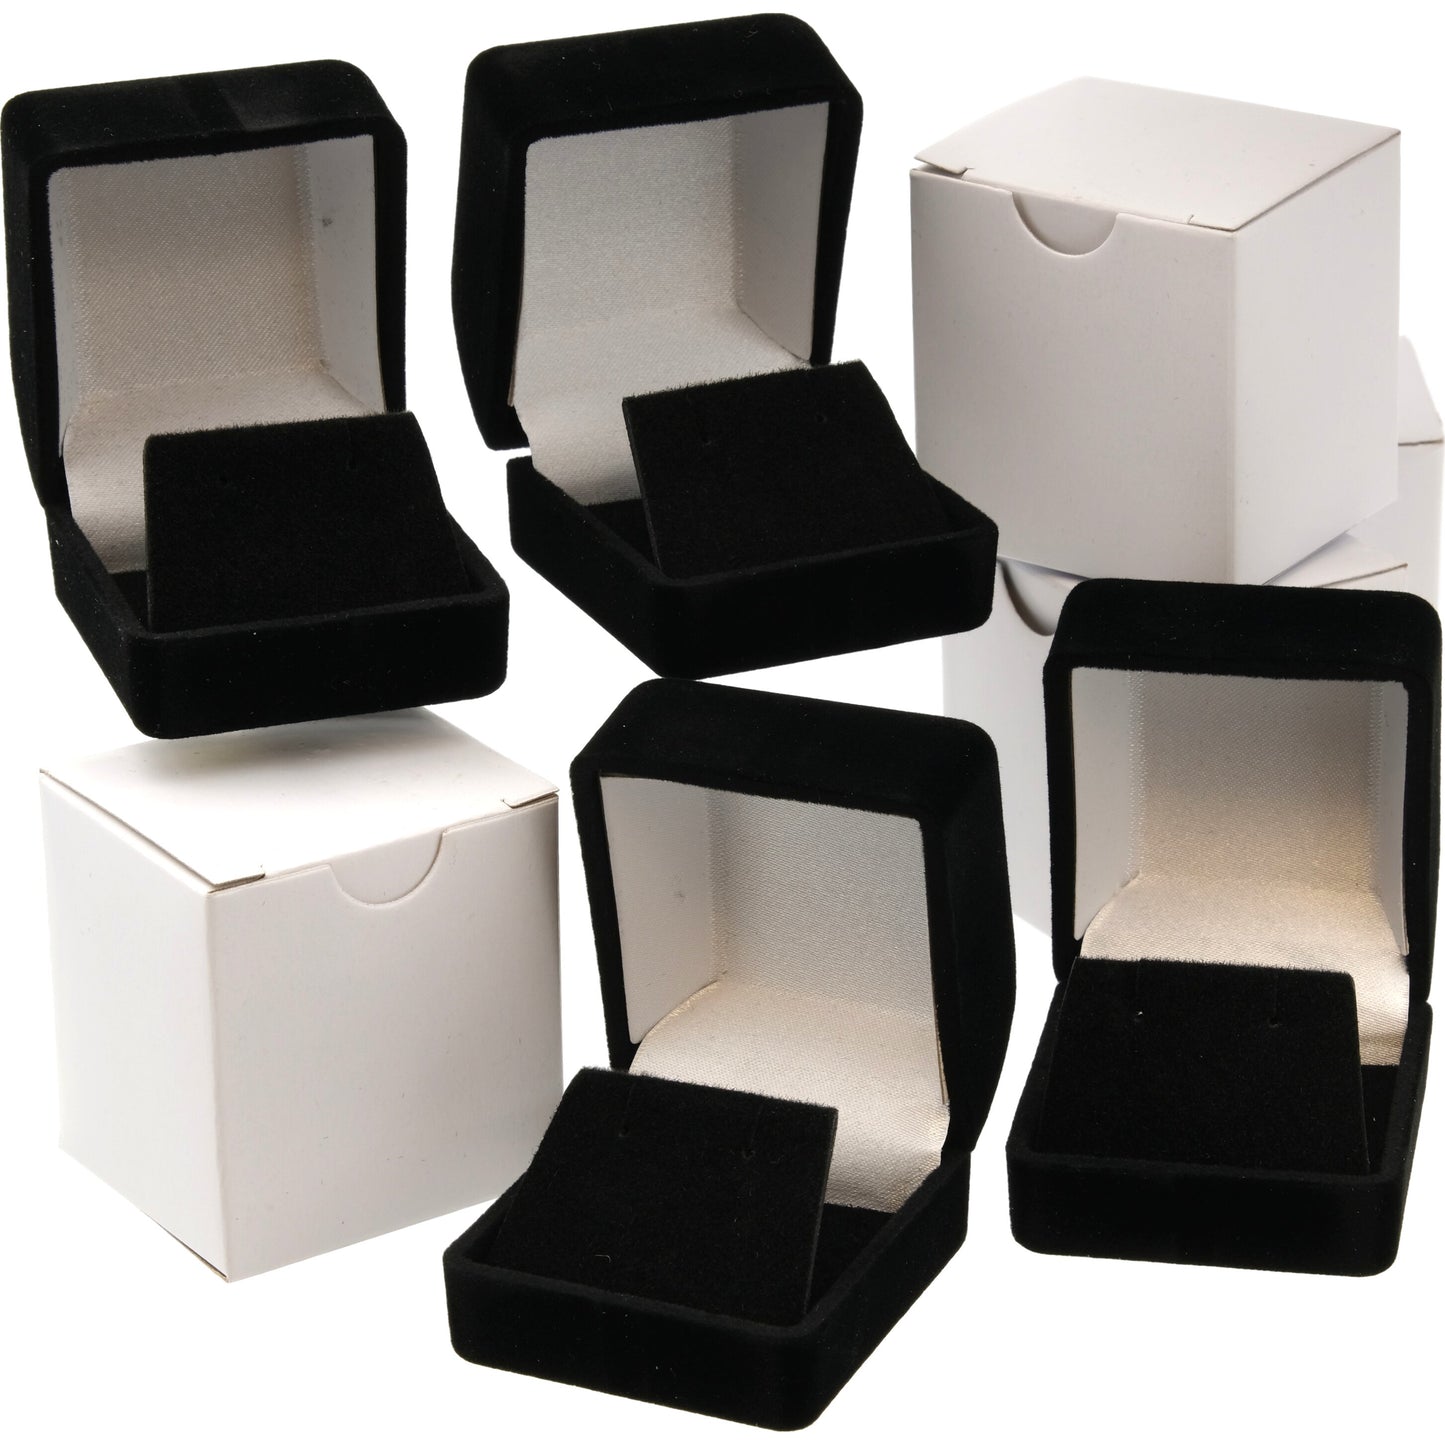 4 Black Flocked Earring Gift Boxes Jewelry Box